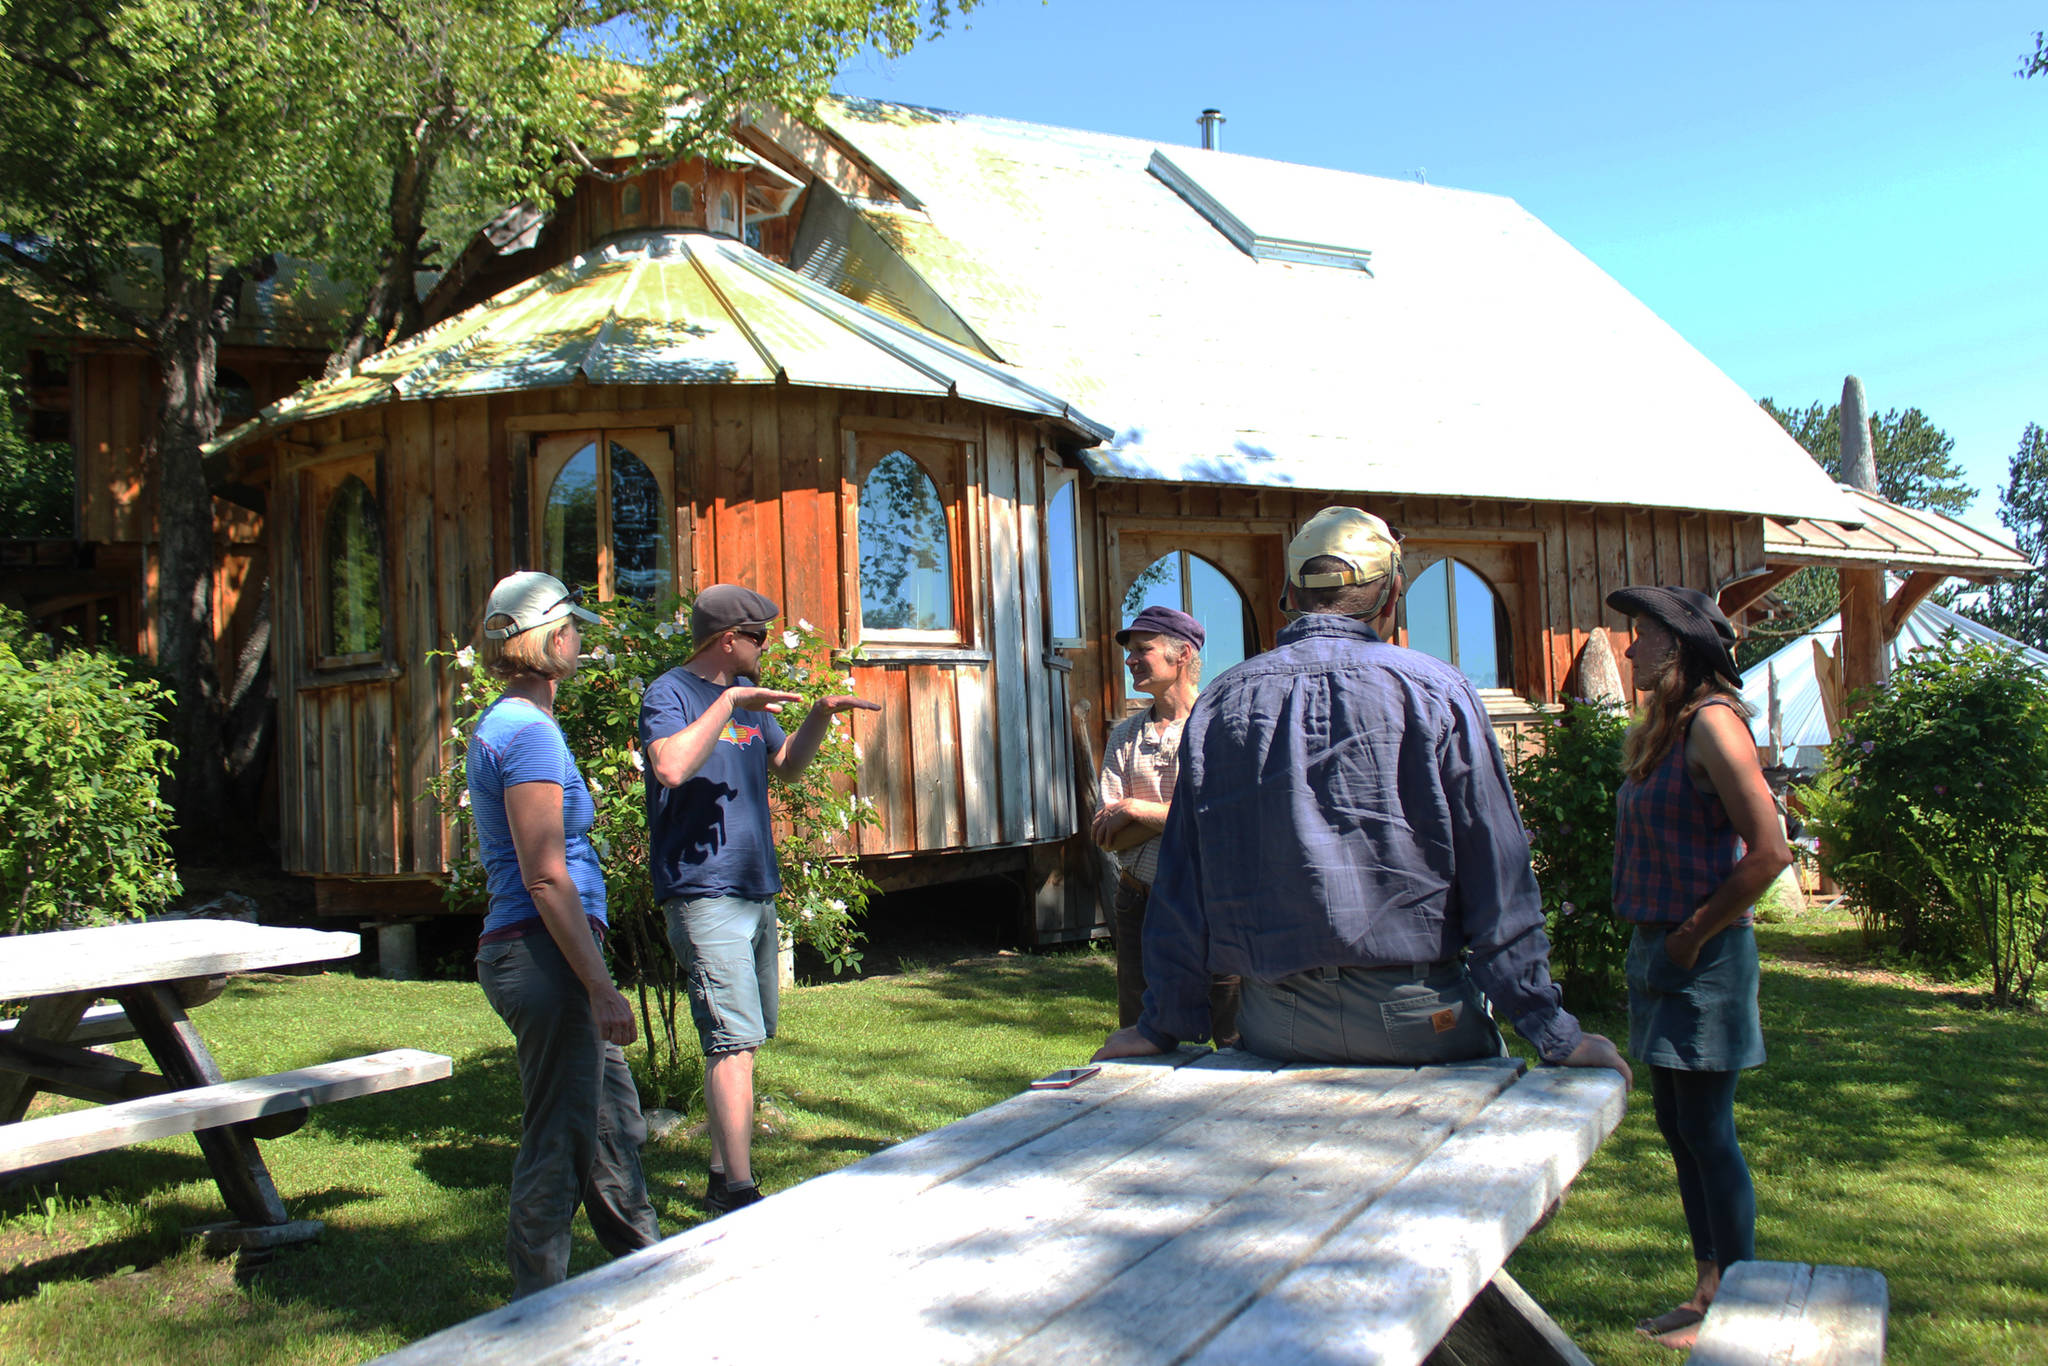 From left to right: Leah Evans Cloud, Jonah Cloud, Jeff Dean, Brad Thornburgh and Ranja Dean chat outside the Deans’ home down East End Road before a tour on Friday, July 6, 2018 near Homer, Alaska. The Deans open their farm and art studios to interested visitors. (Photo by Megan Pacer/Homer News)